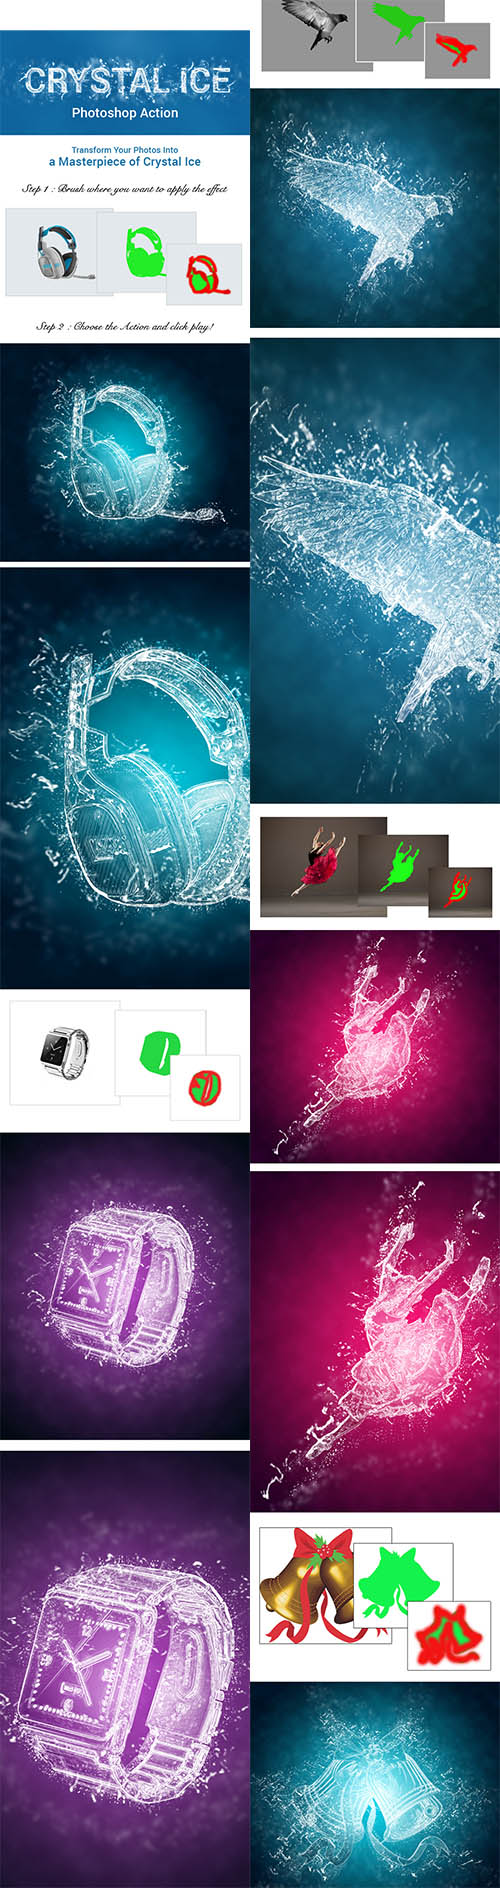 crystal ice photoshop action free download